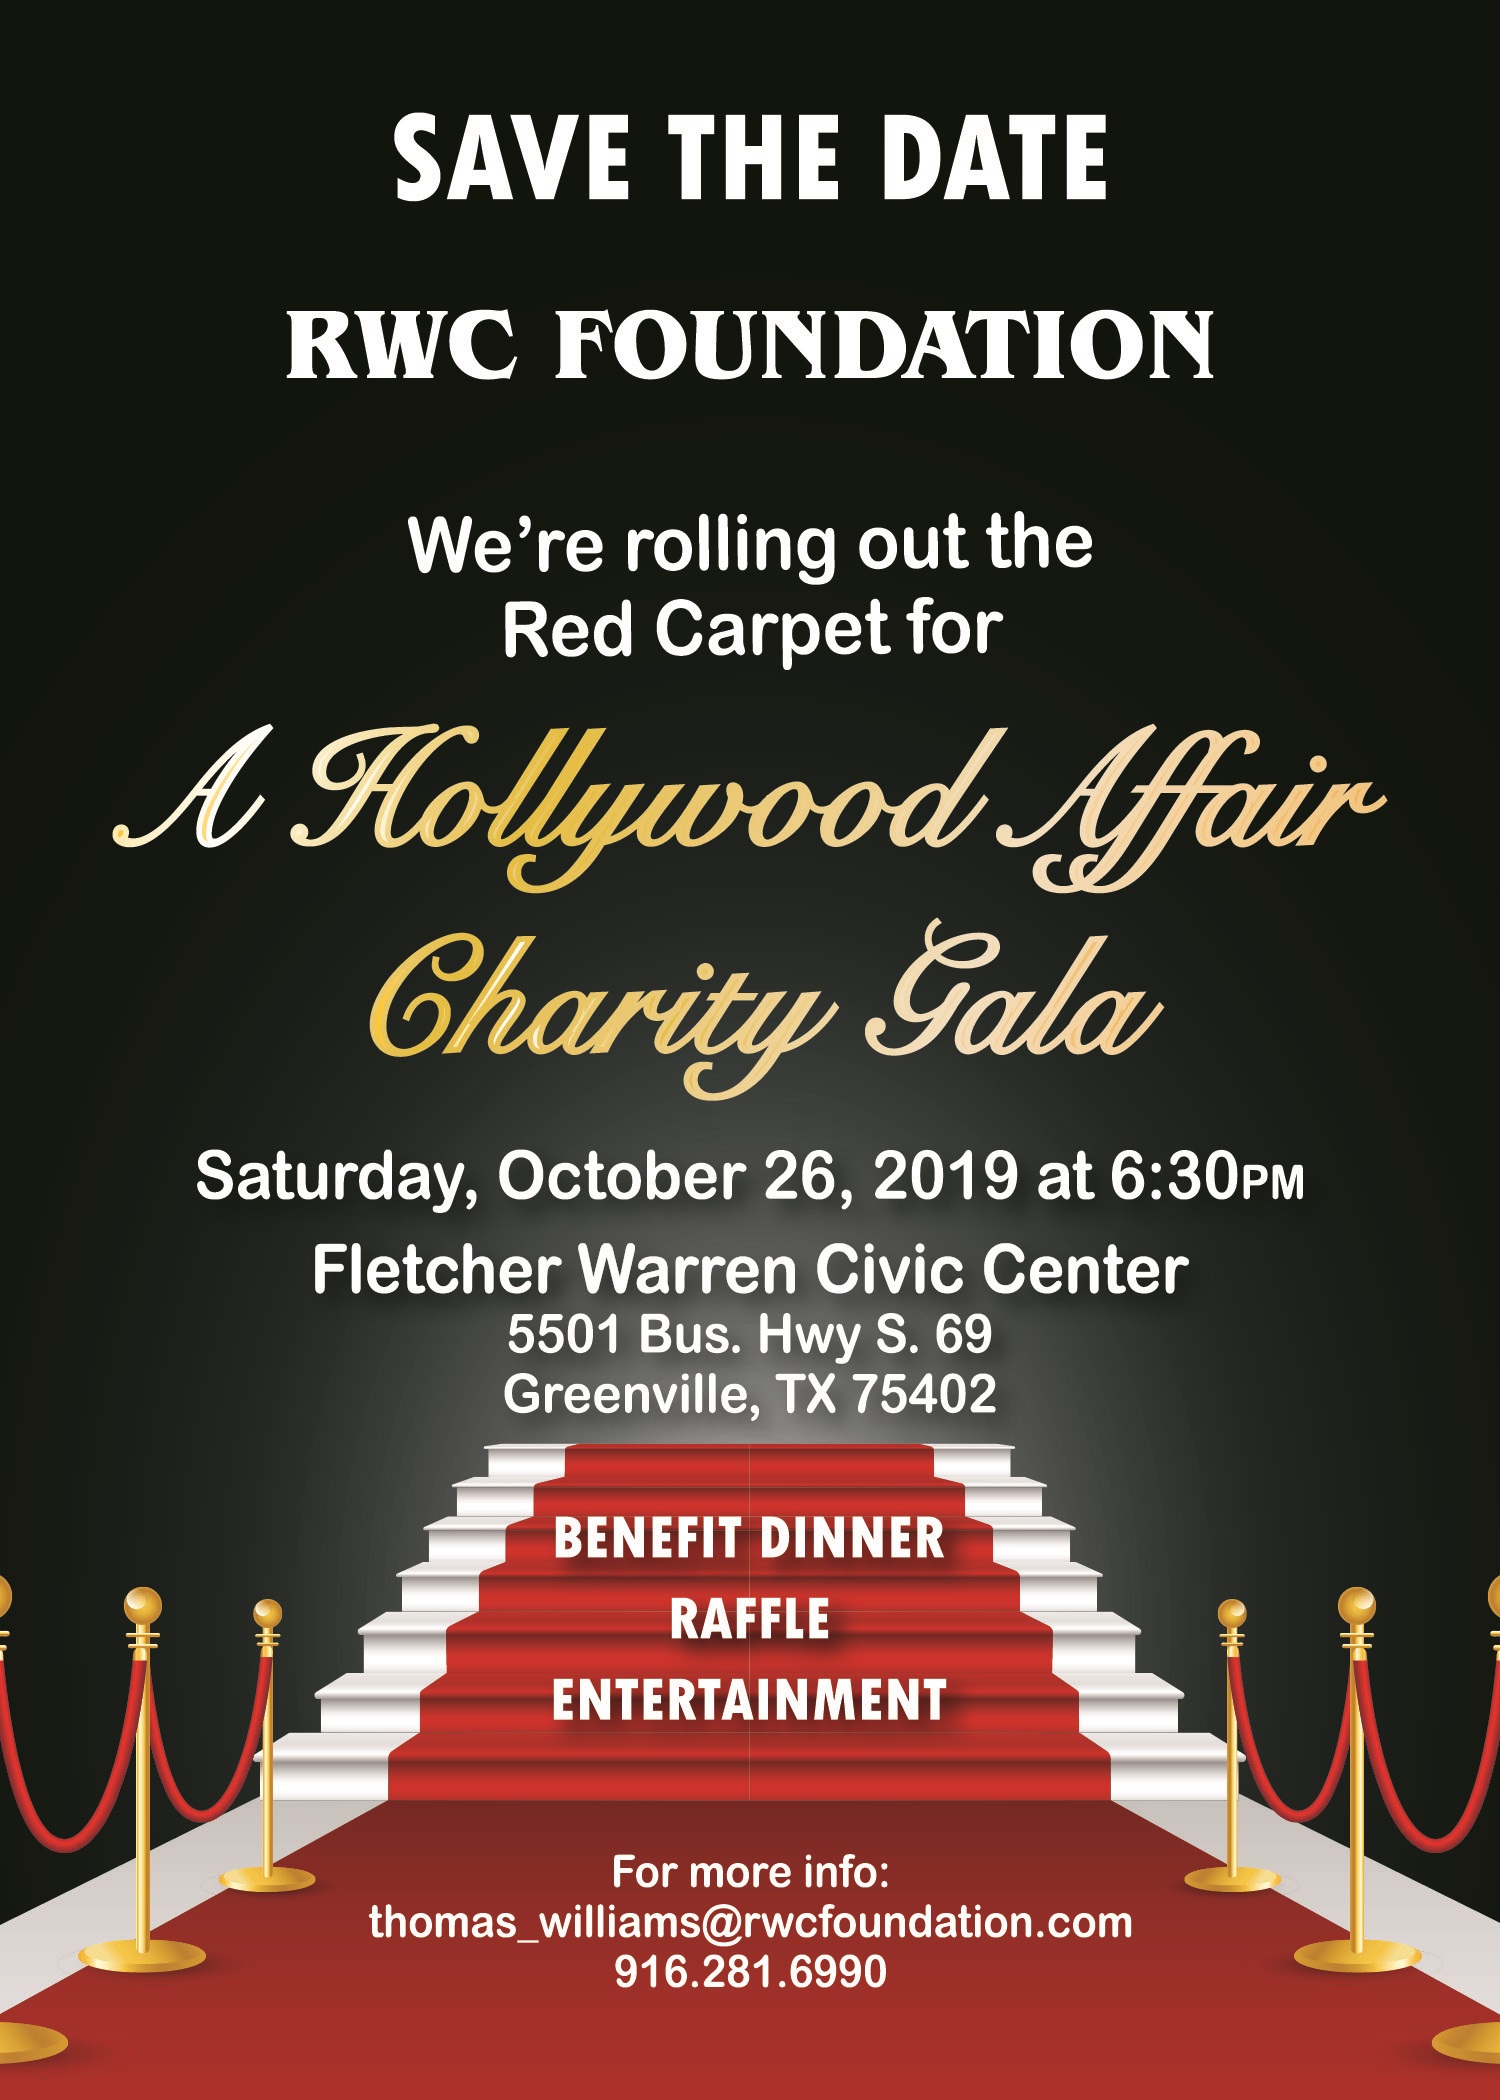 2019 RWC Foundation Save The Date Card